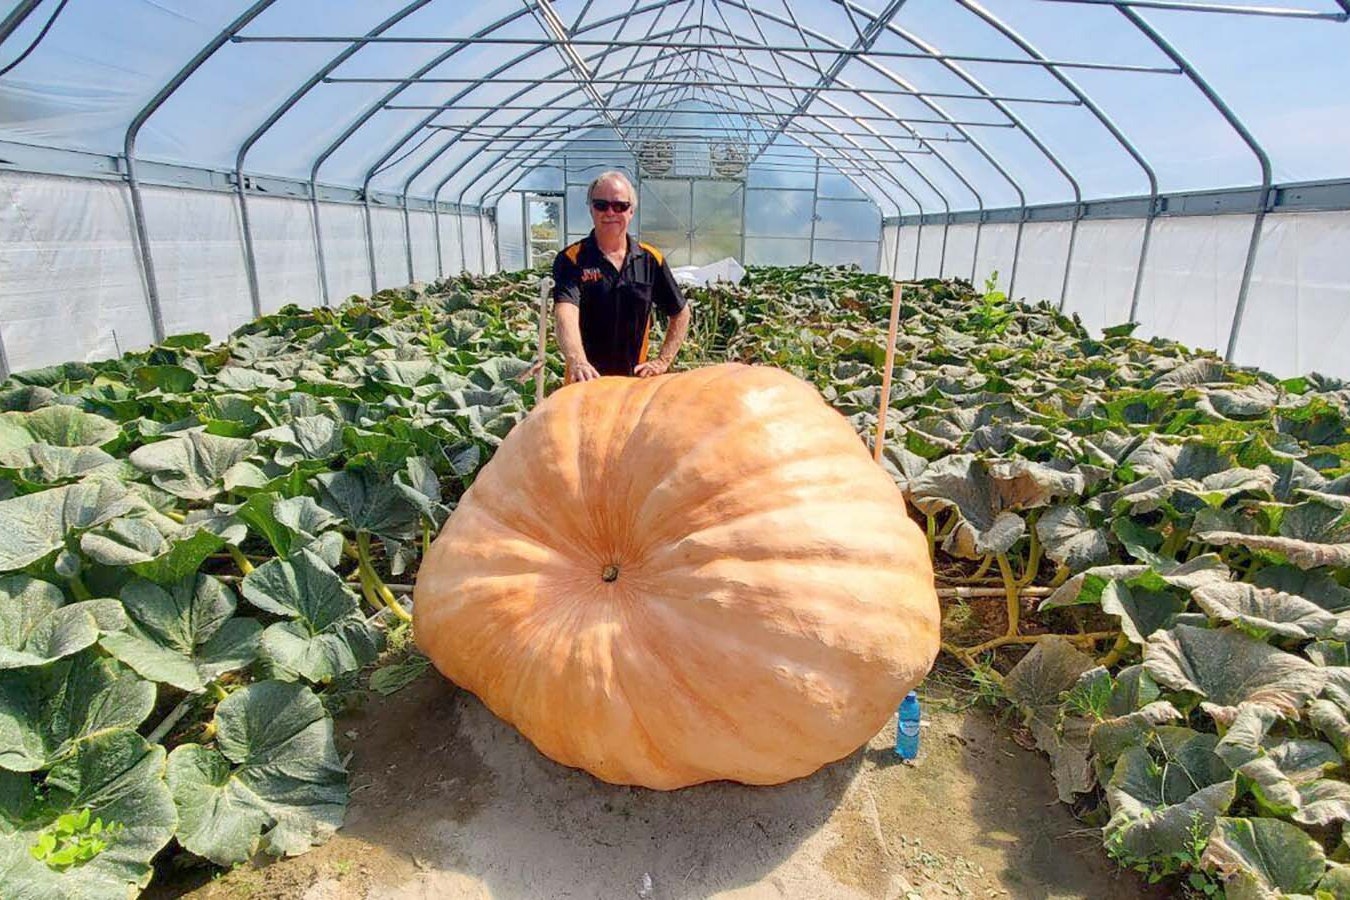 Jay Richard and "Marion," his 1,700-pound pumpkin in his P2K greenhouse in Worland. This is the first year Richard has used the custom-built greenhouse, where he can control the humidity and temperature needed to grow the biggest pumpkins possible. He won't reach 2,000 pounds this year, but he learned enough to get there in the future.